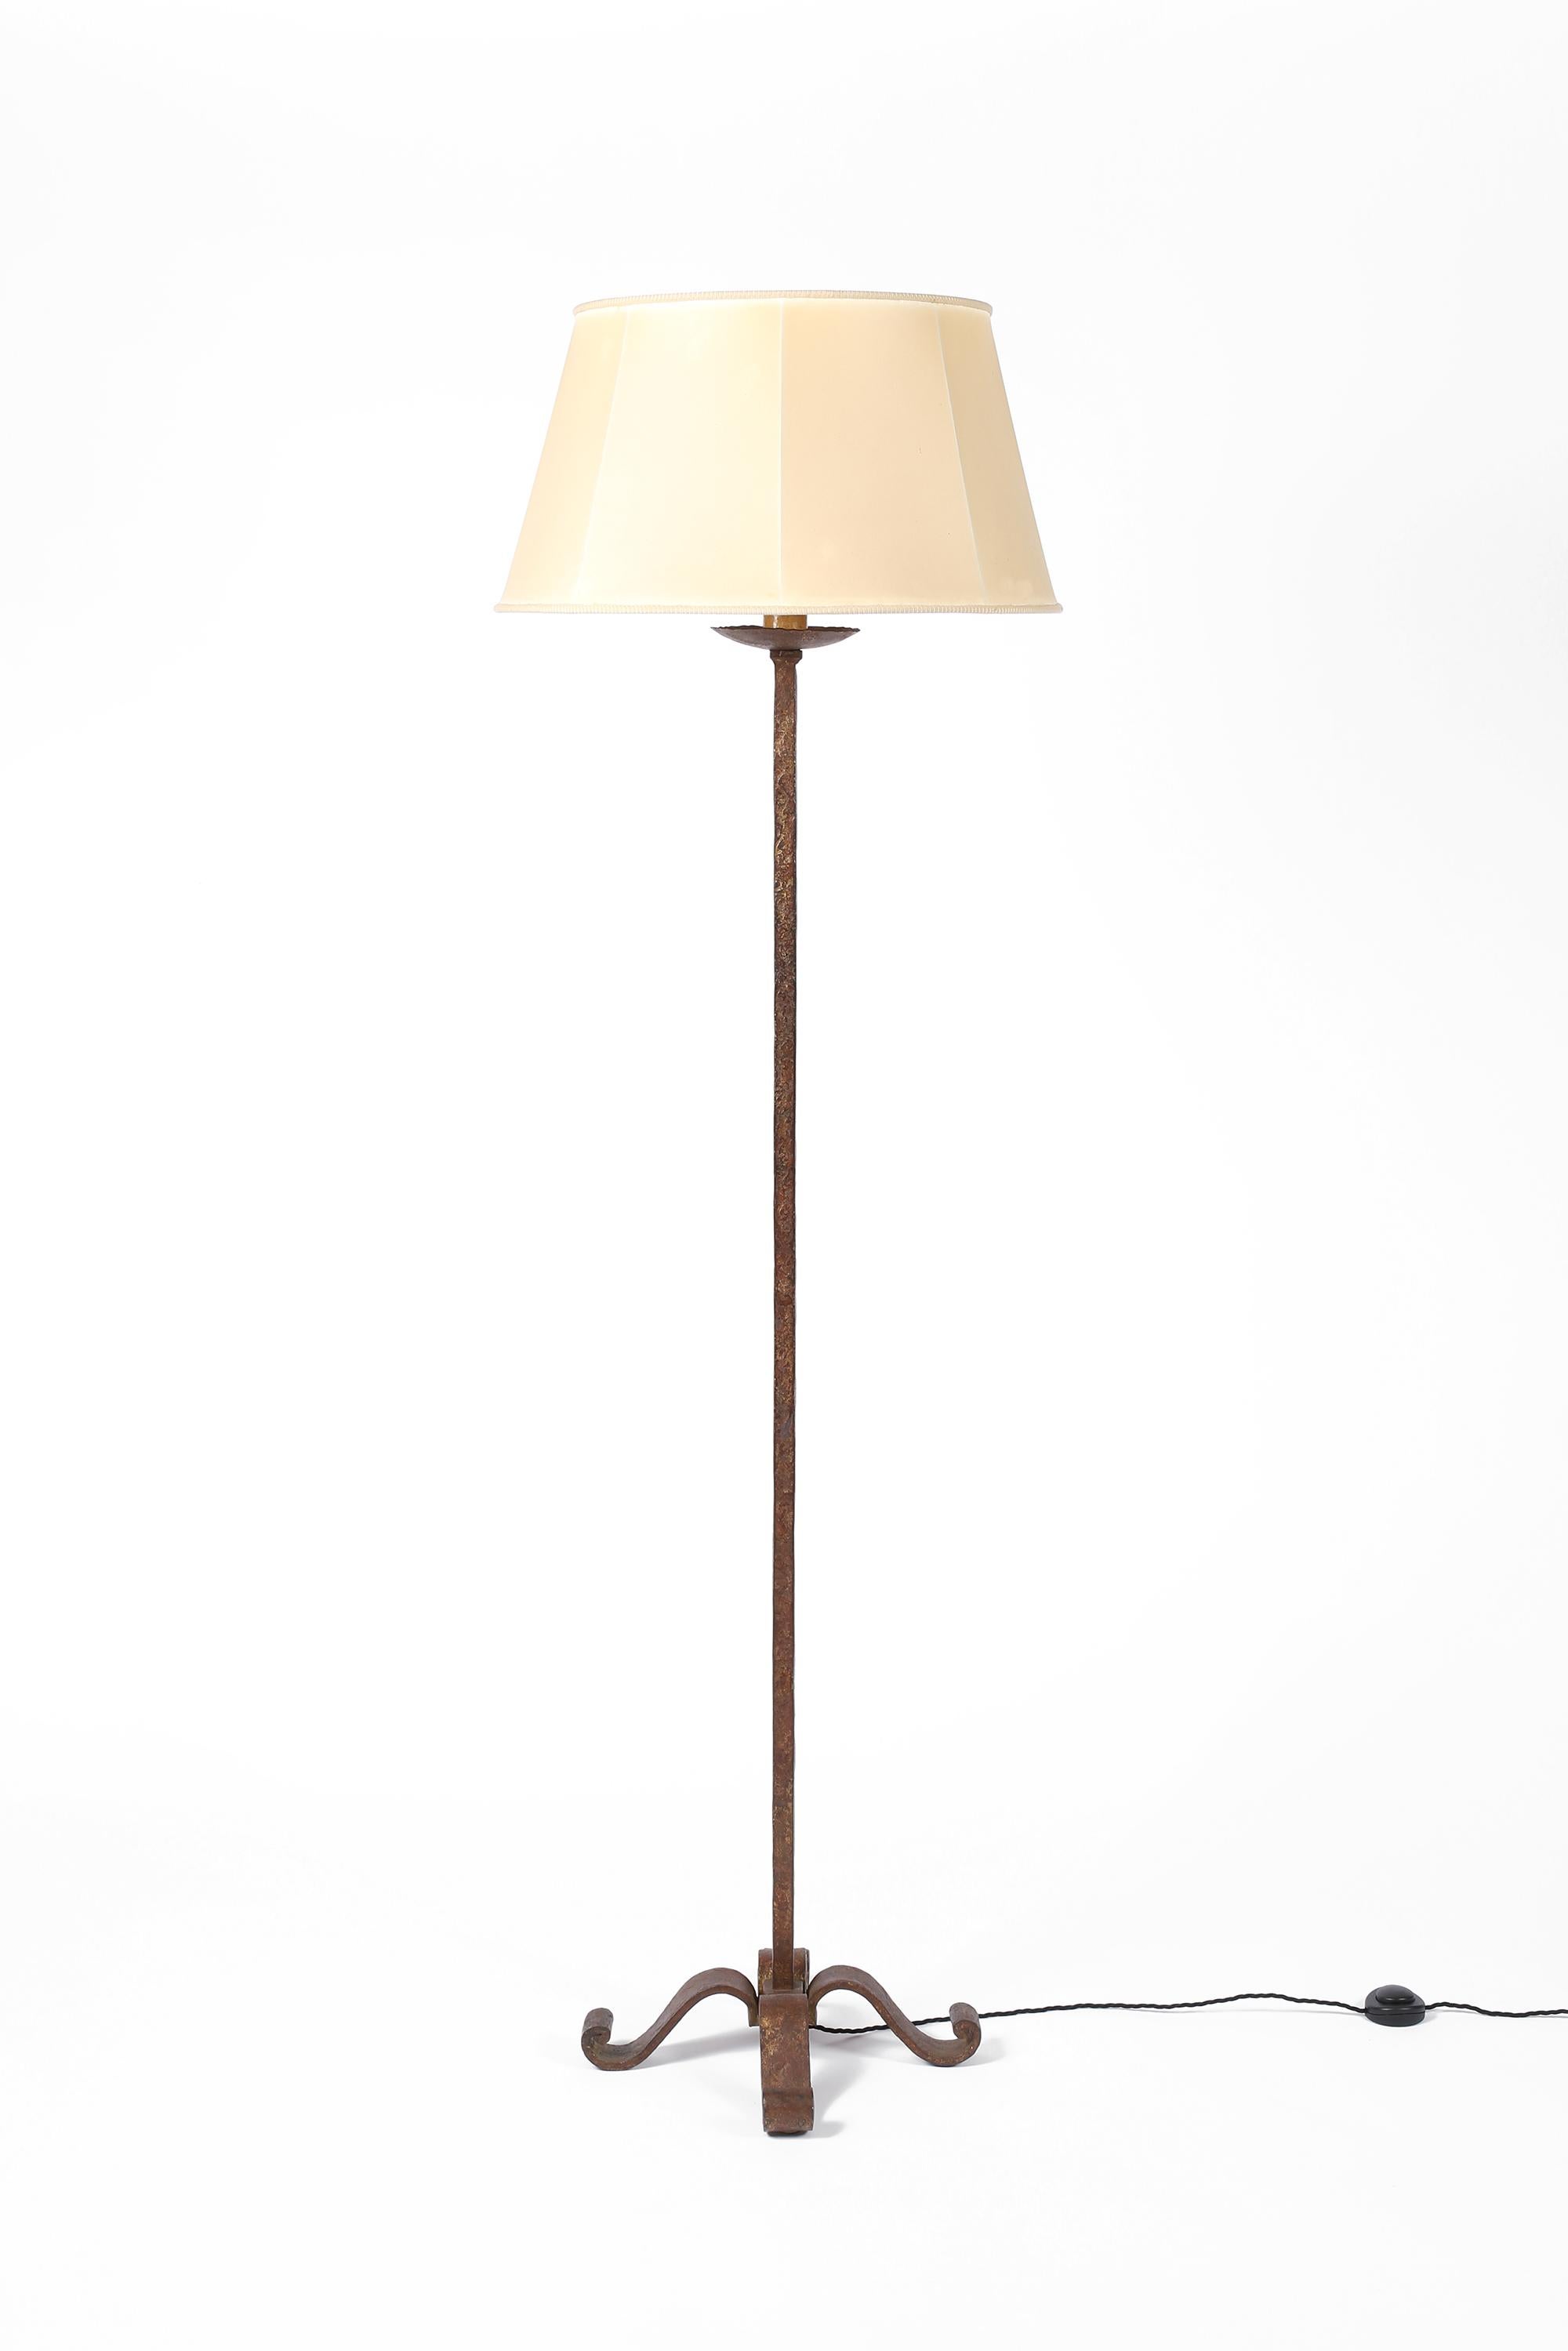 A chic, large forged iron floor lamp with simple stem and decorative scrolled base by Maison Ramsay - Paris. Beautifully patinated with visible remnants of the original gilt finish, the lamp retains its original vellum shade in superb condition.